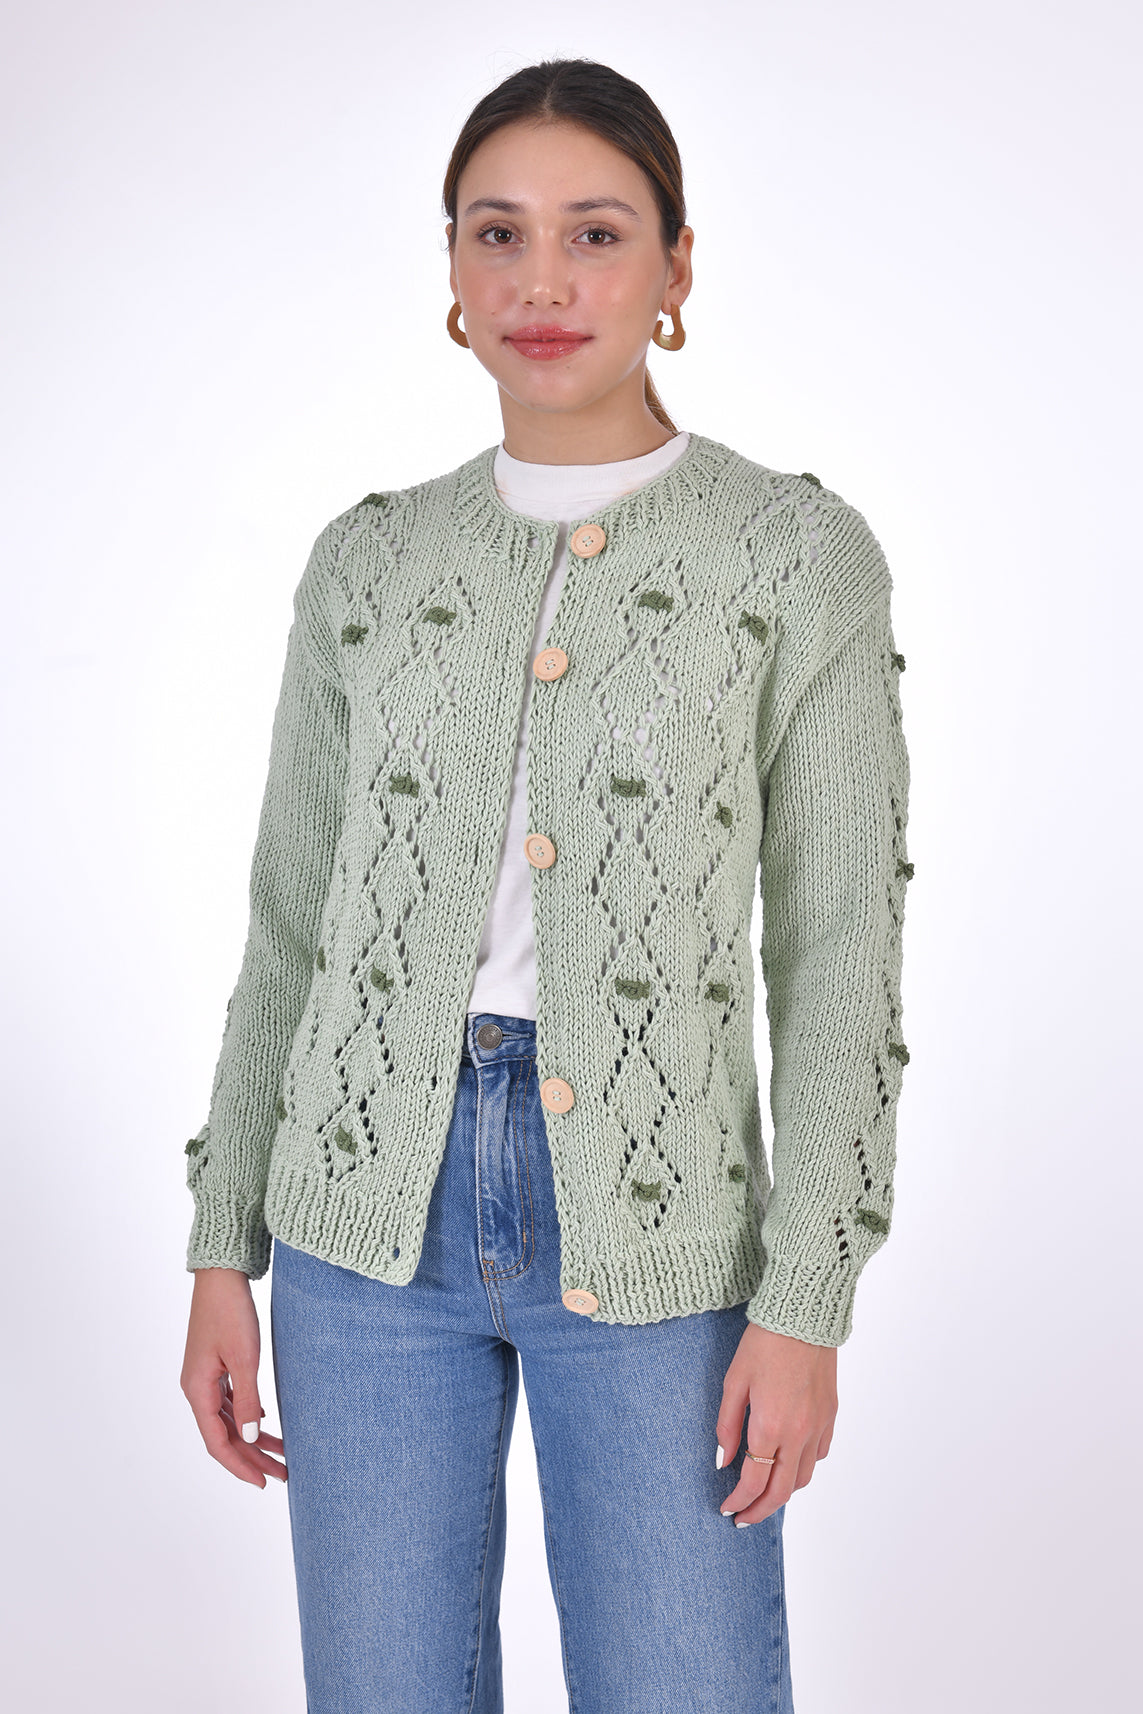 AVA Cotton Button Front Cardigan by Fanm Mon